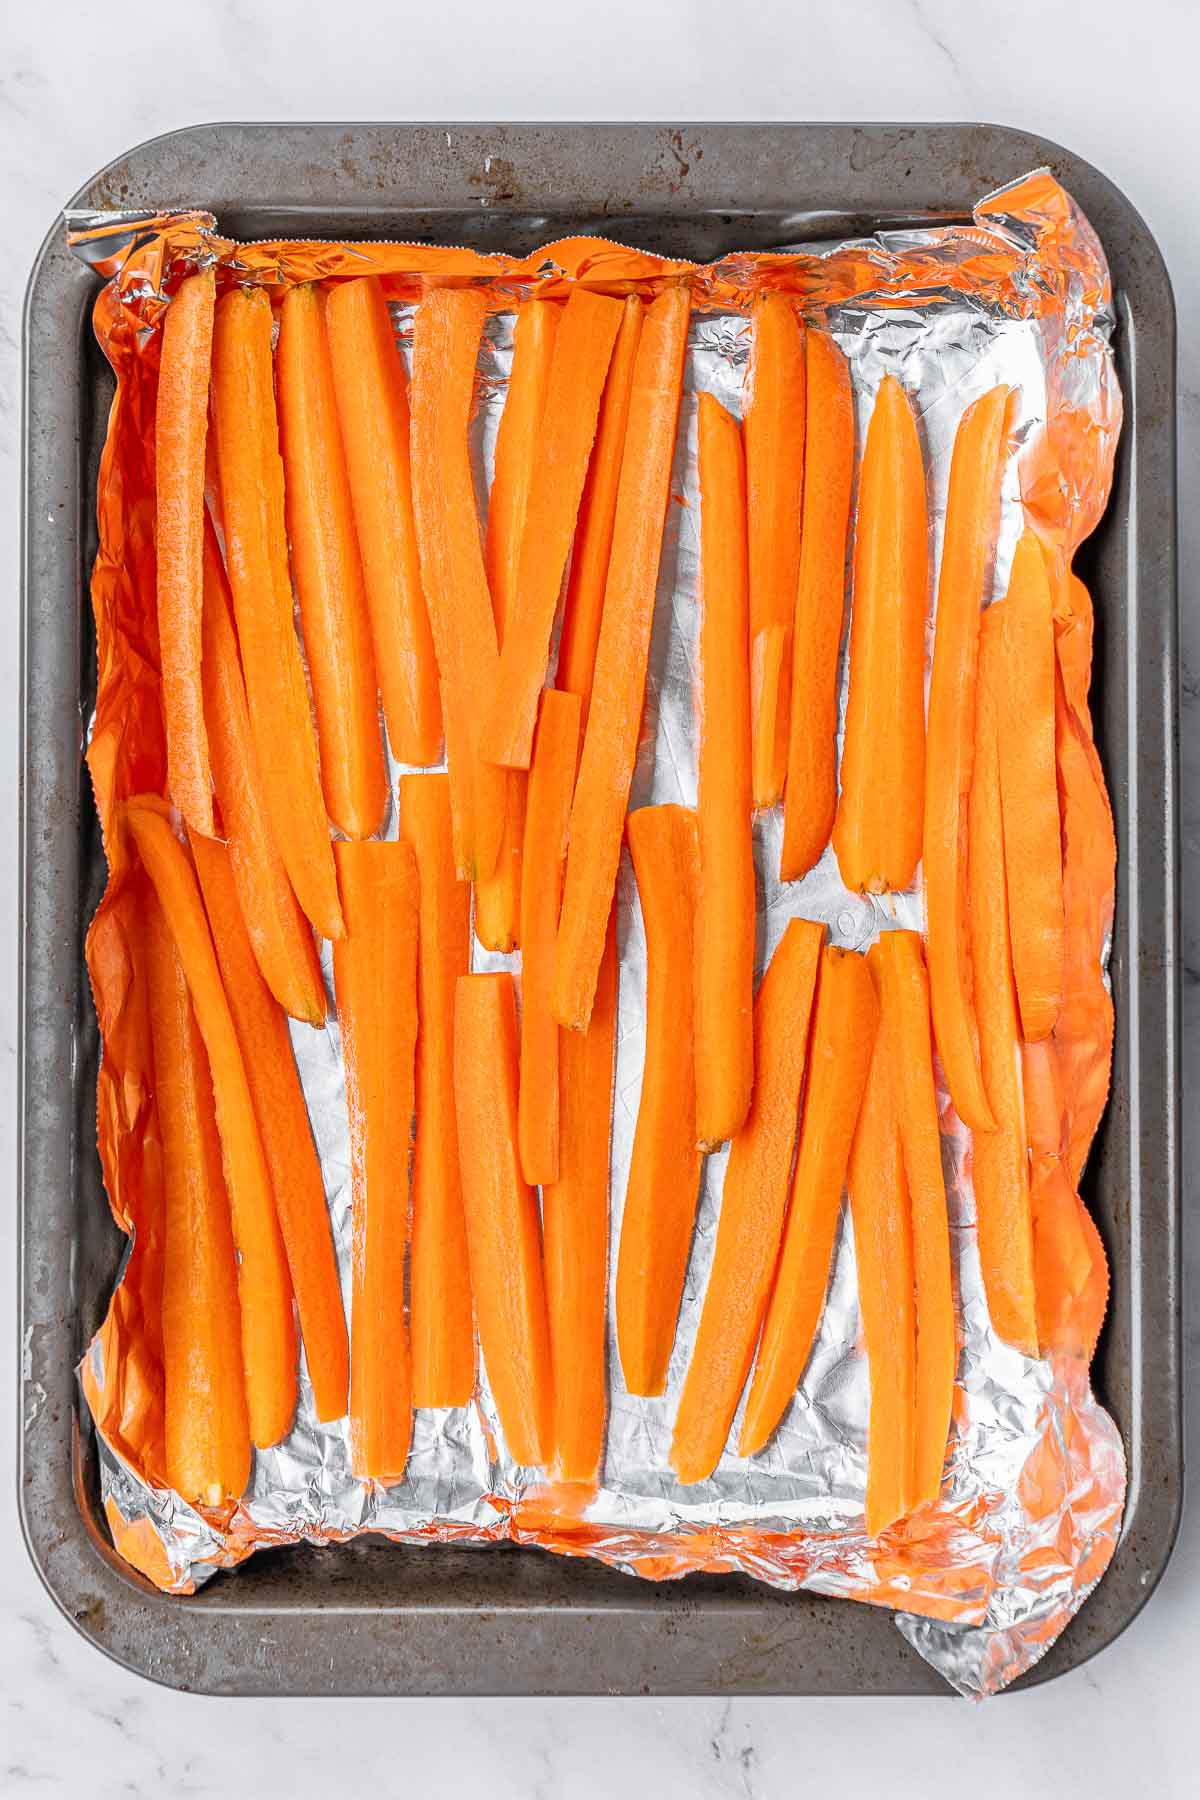 Carrot slices on a baking sheet.